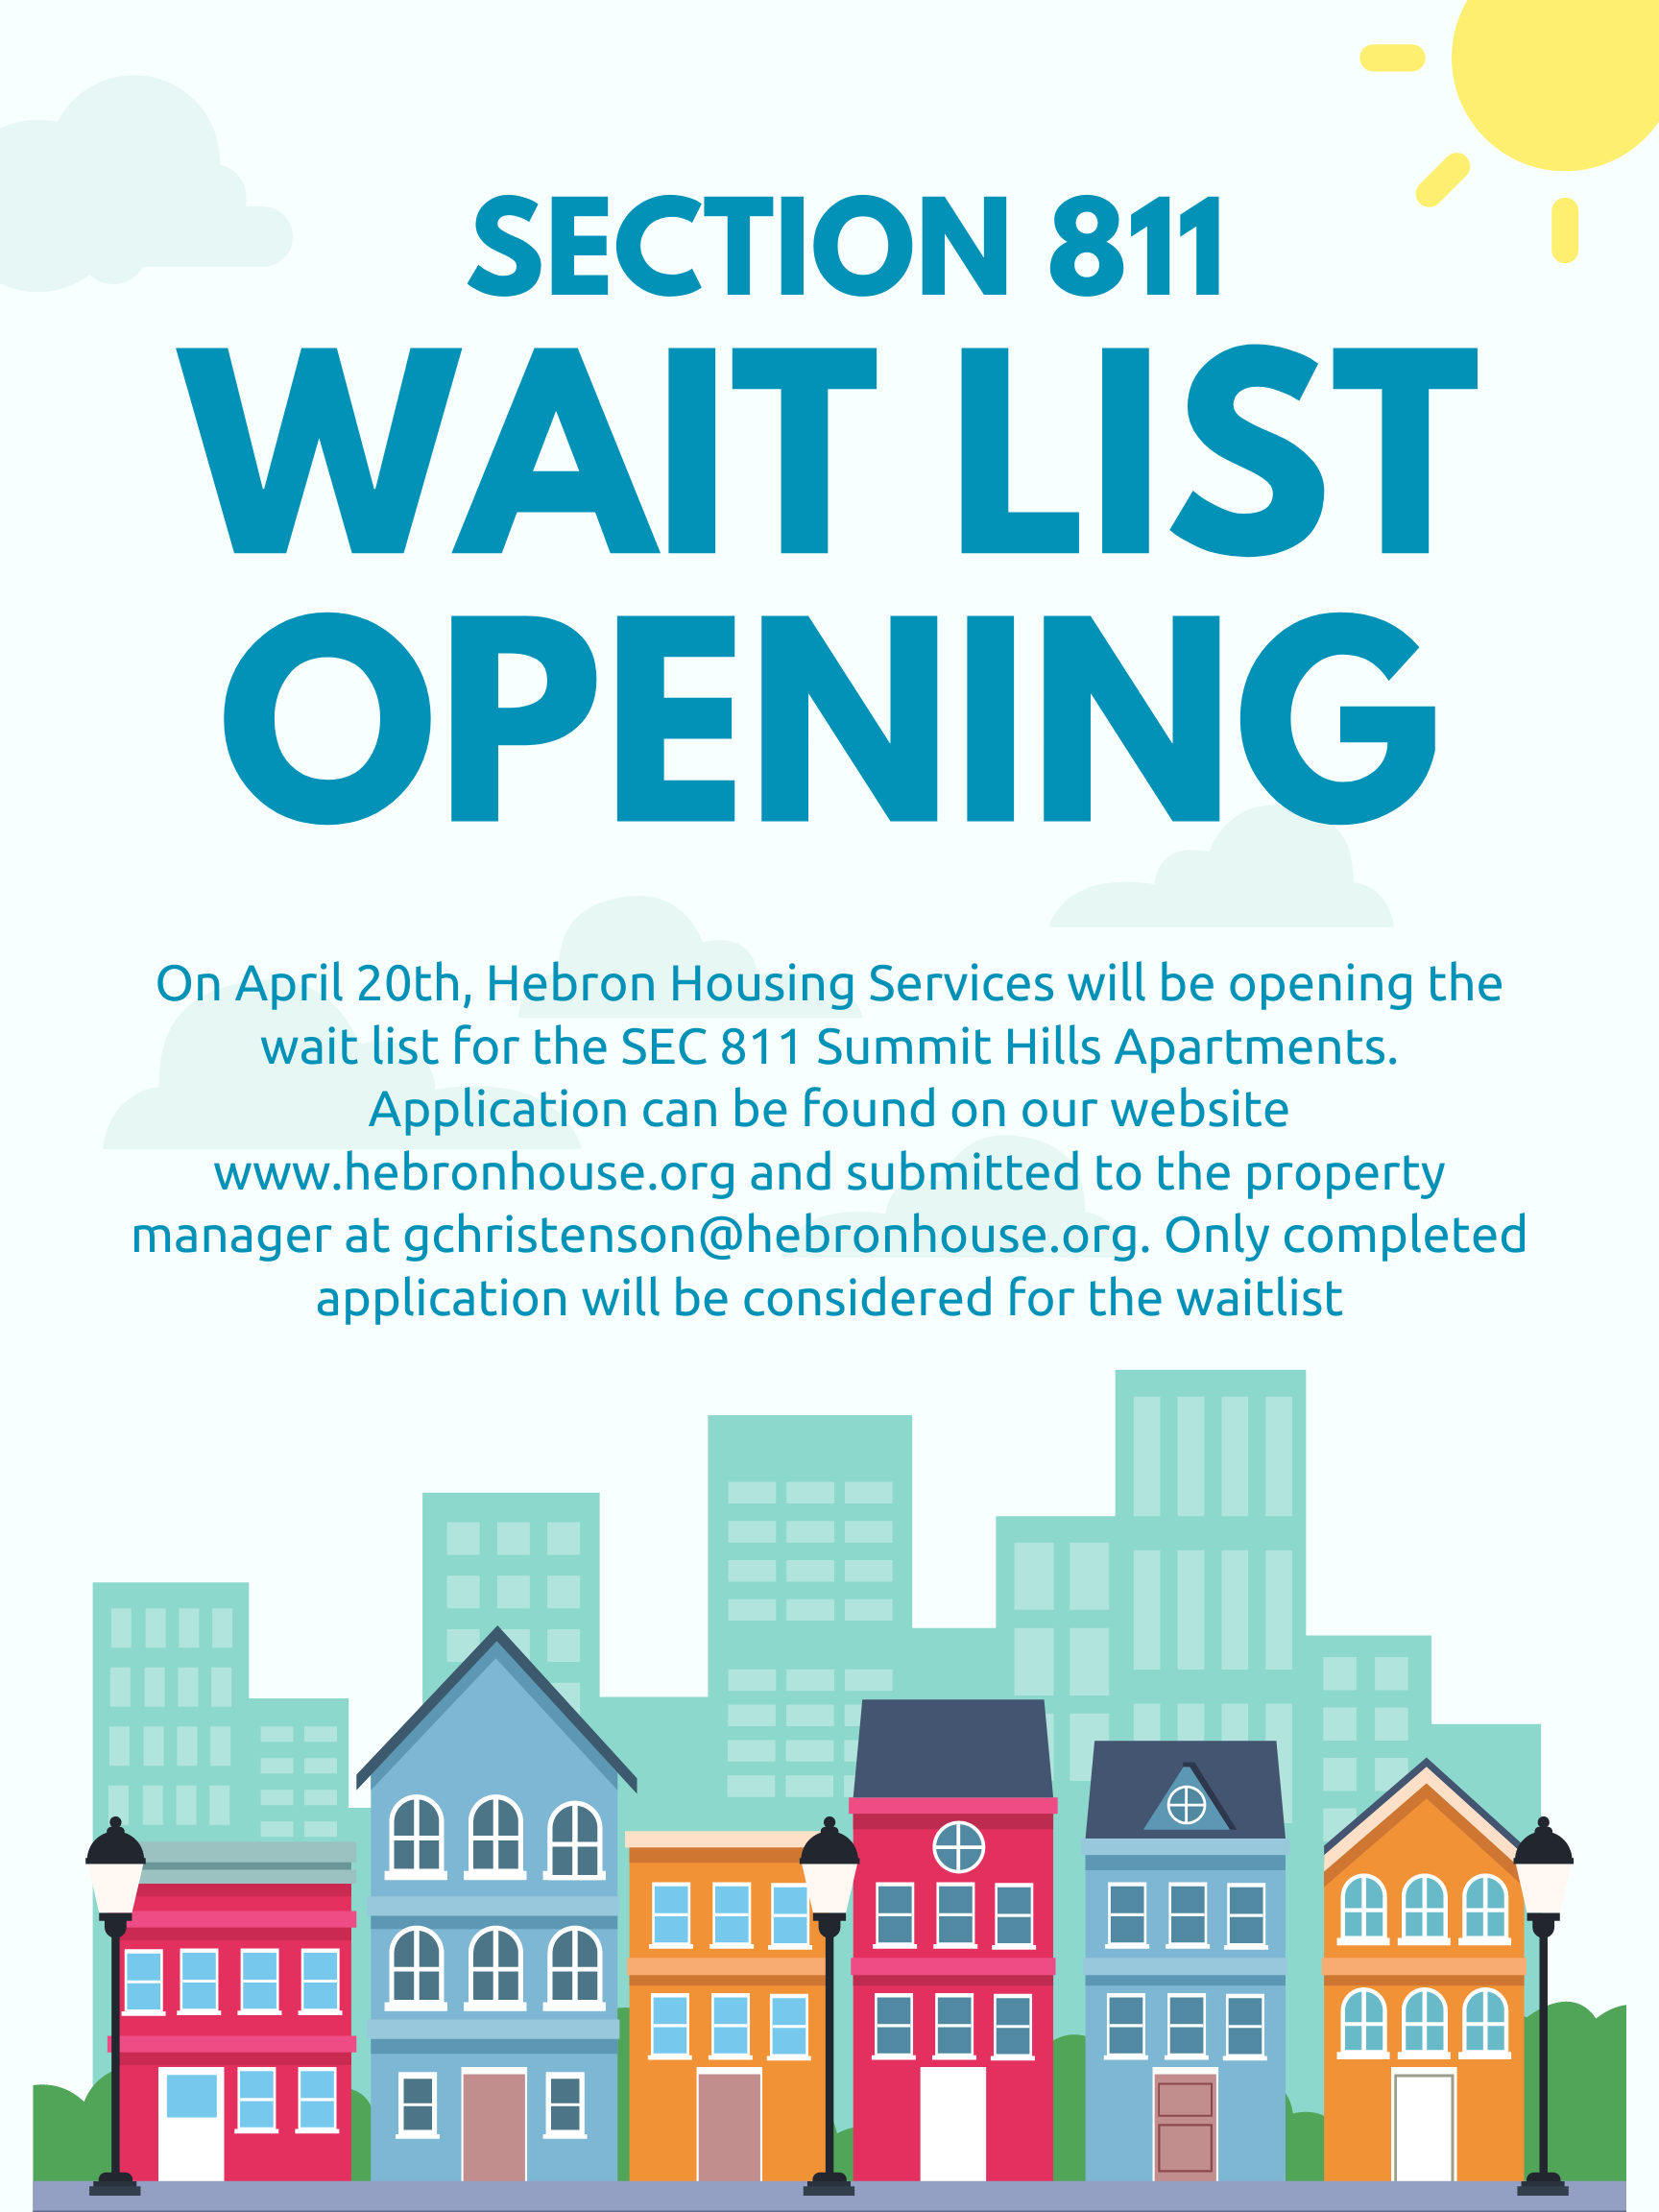 image for summit-hills-waitlist-open-april-20th blog post